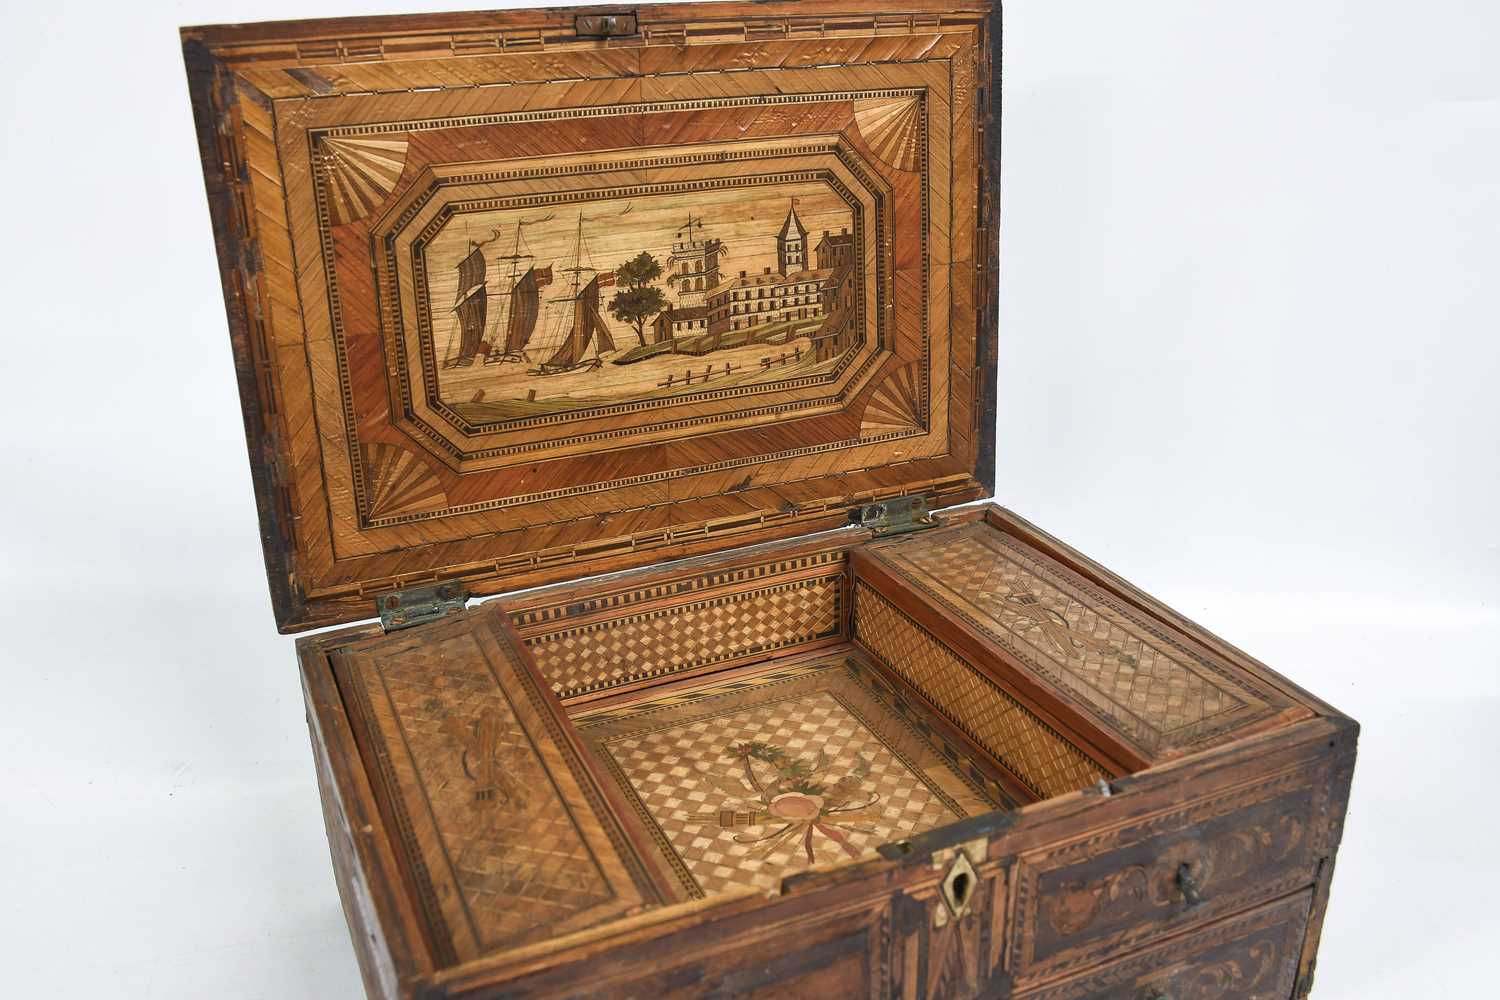 A French Gilt and Colour Straw-Work Box, probably Prisoner of War work, early 19th century, of - Image 2 of 2